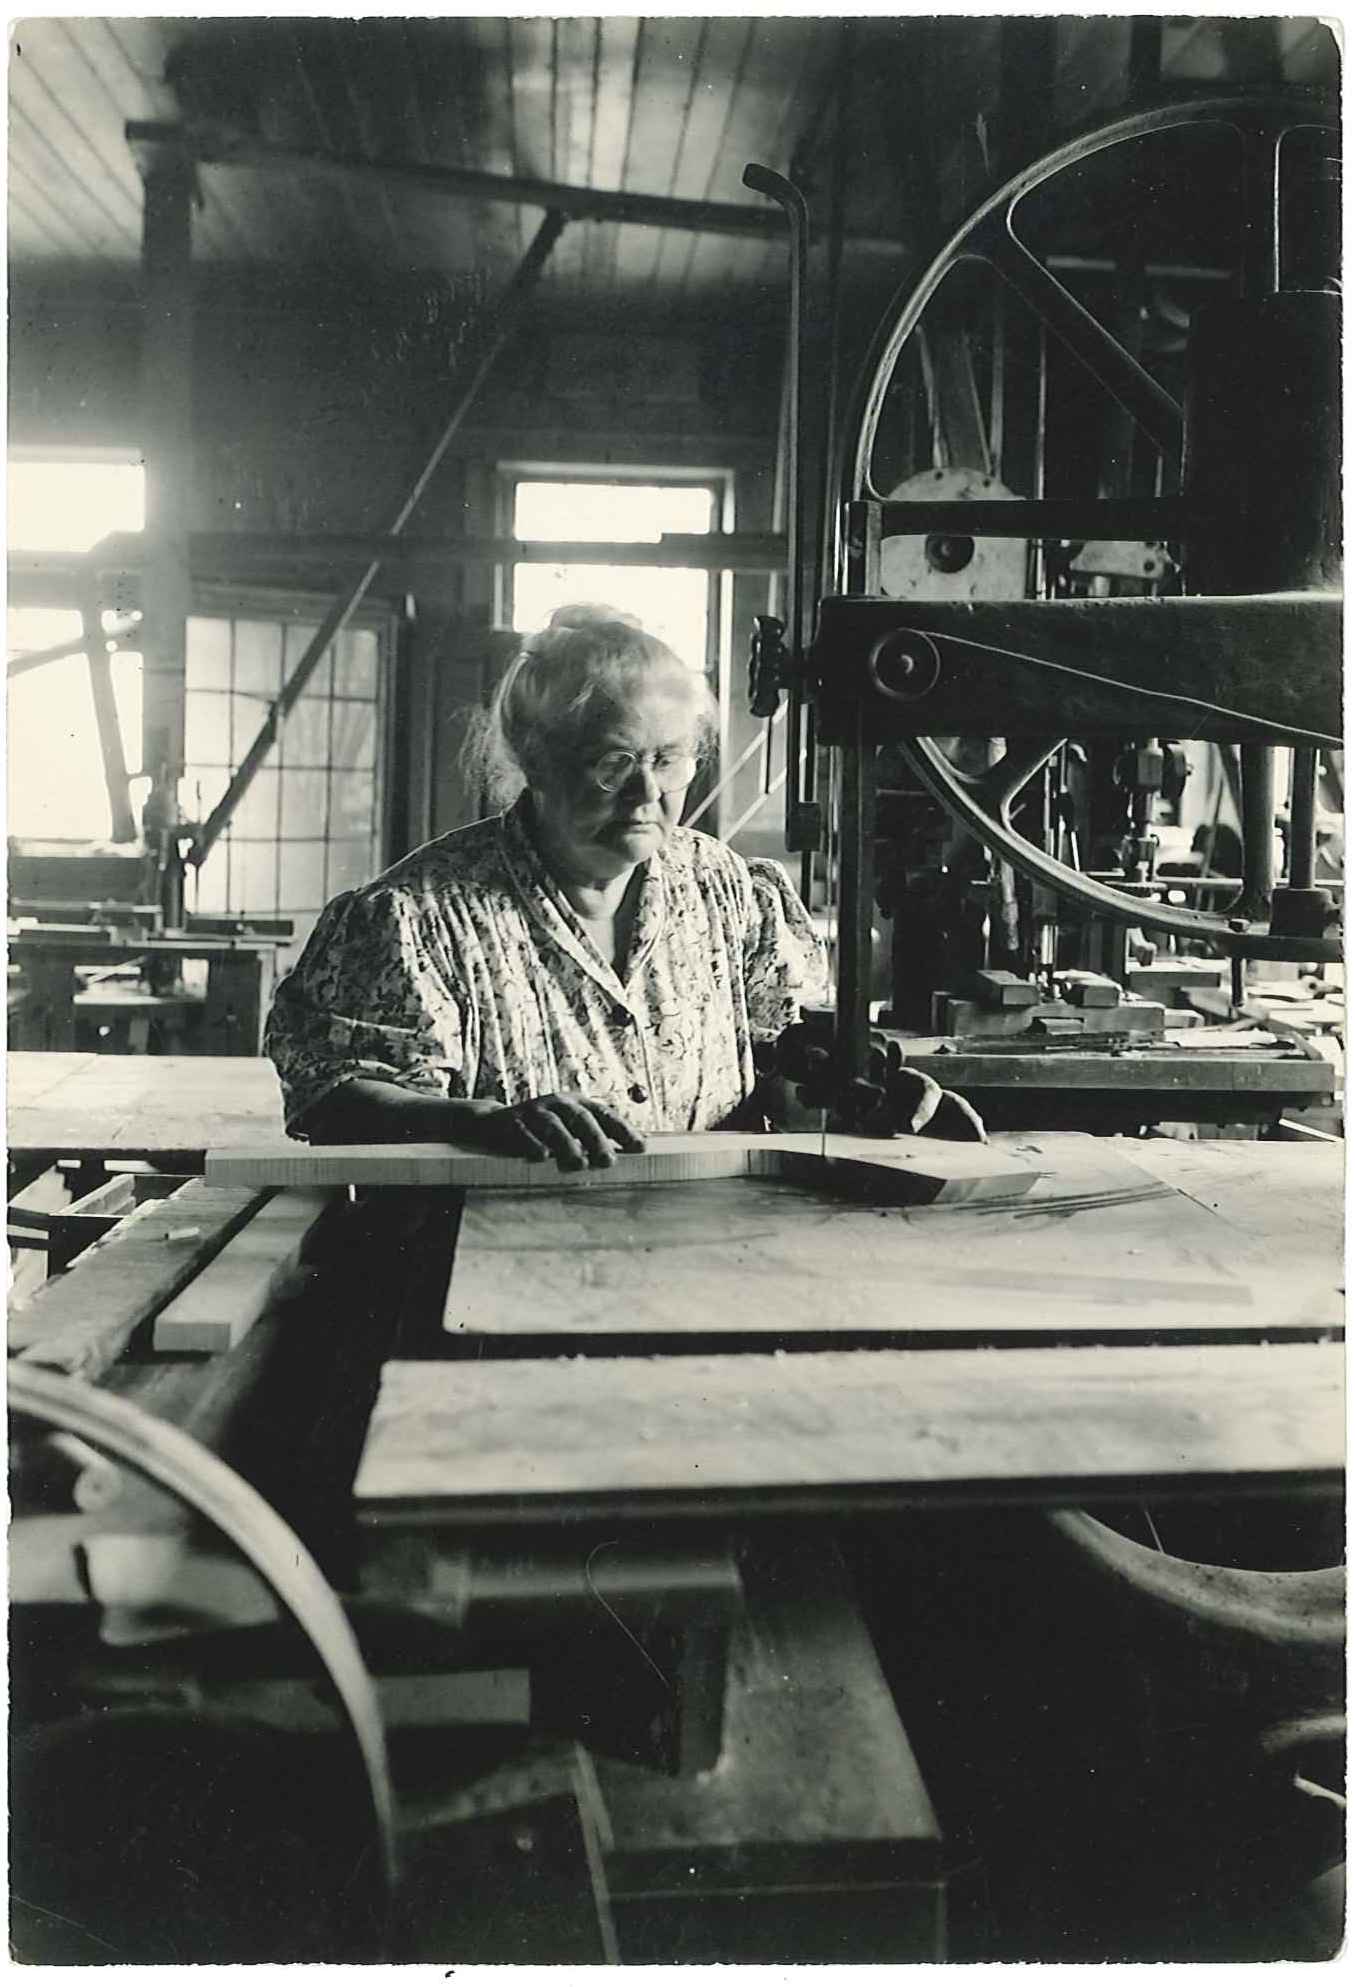 An old black and white photo of a woman working in a factory.